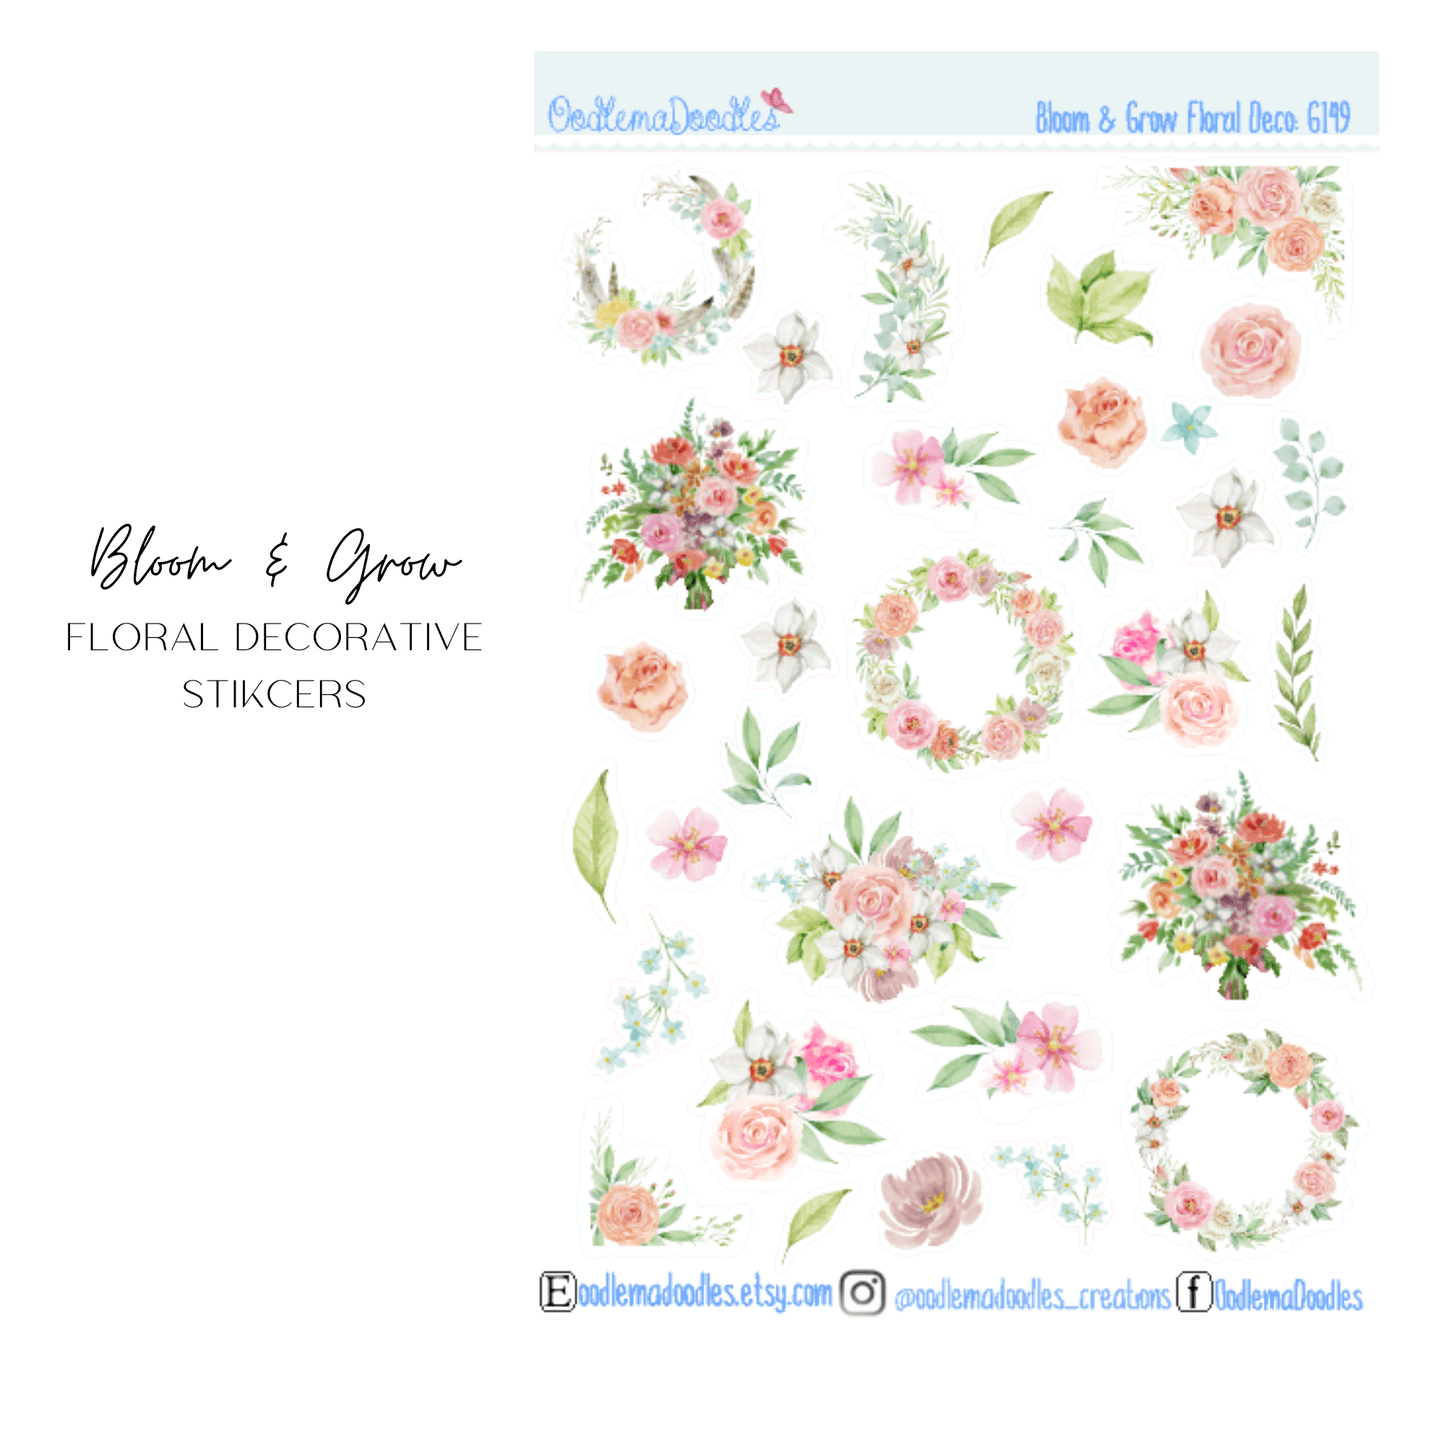 Bloom & Grow Floral Decorative Stickers - oodlemadoodles